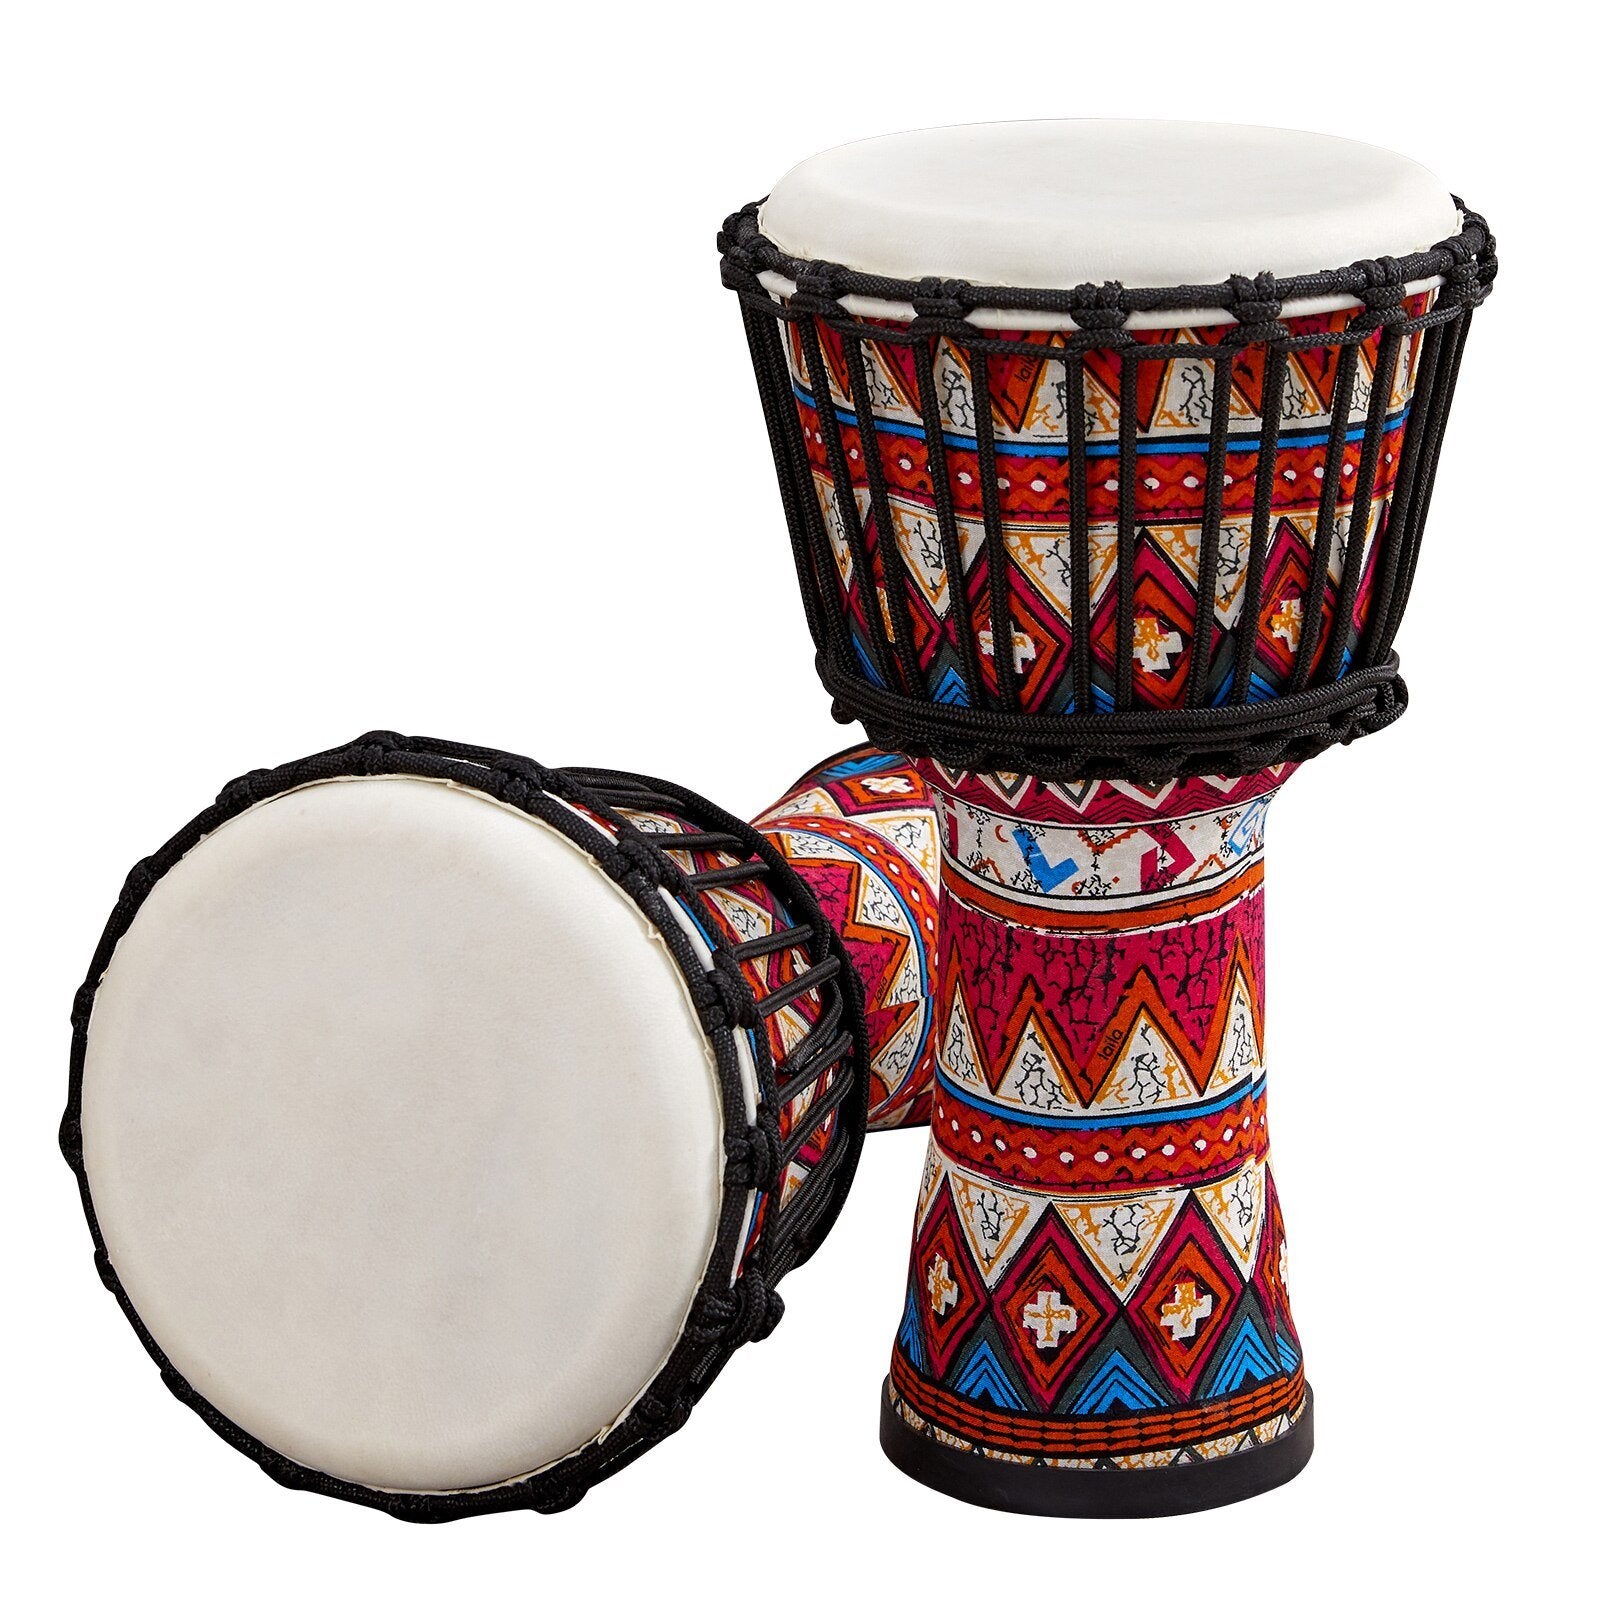 8 Inch Portable African Drum Djembe Hand Drum with Colorful Art Patterns Percussion Musical Instrument - AKLOT